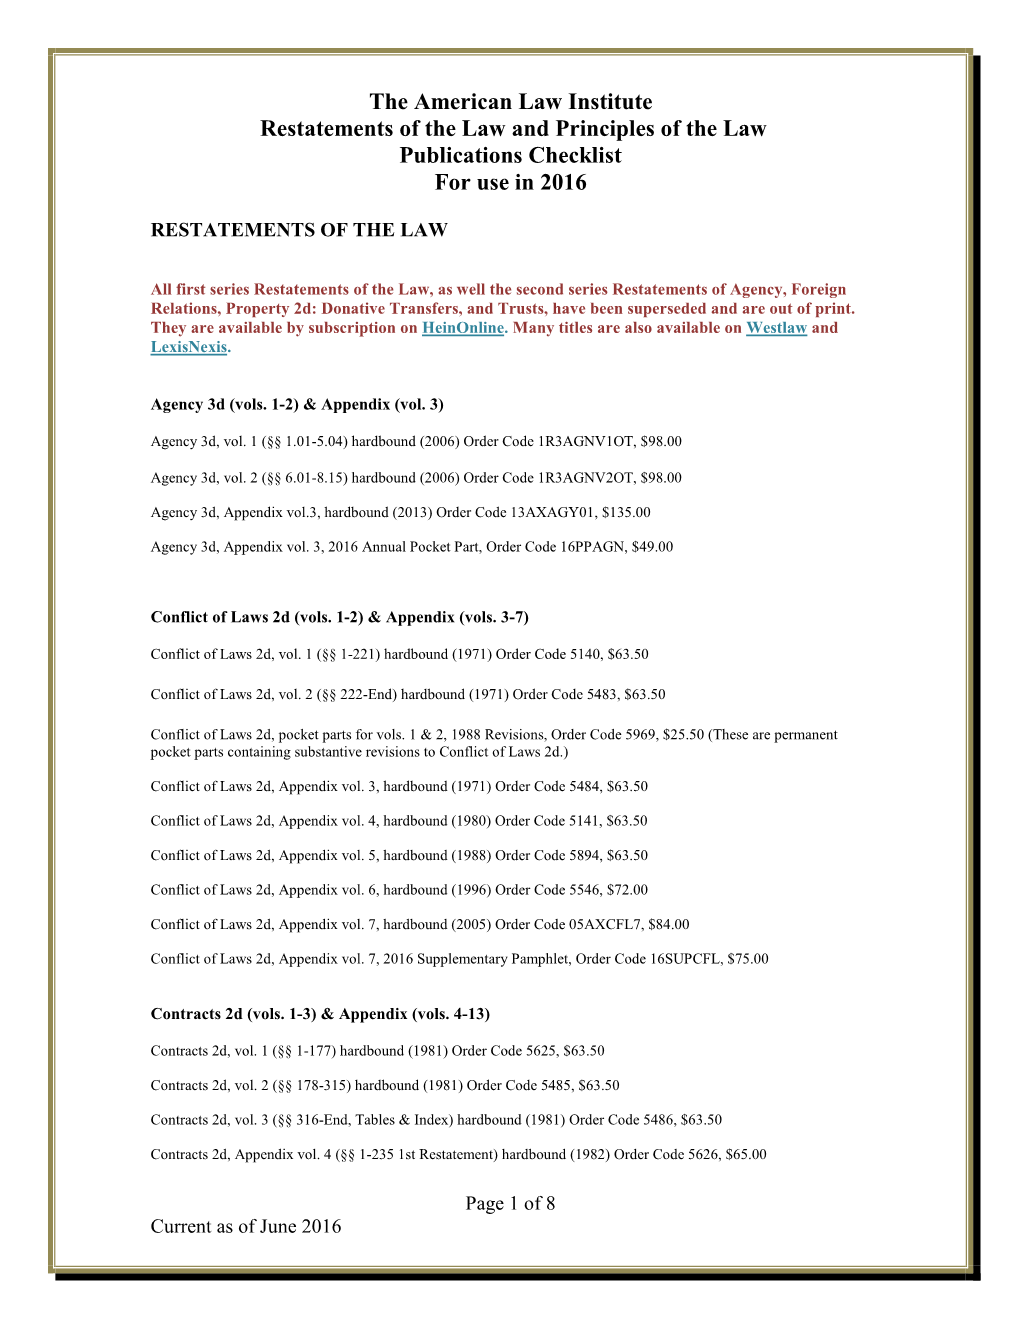 The American Law Institute Restatements of the Law and Principles of the Law Publications Checklist for Use in 2016